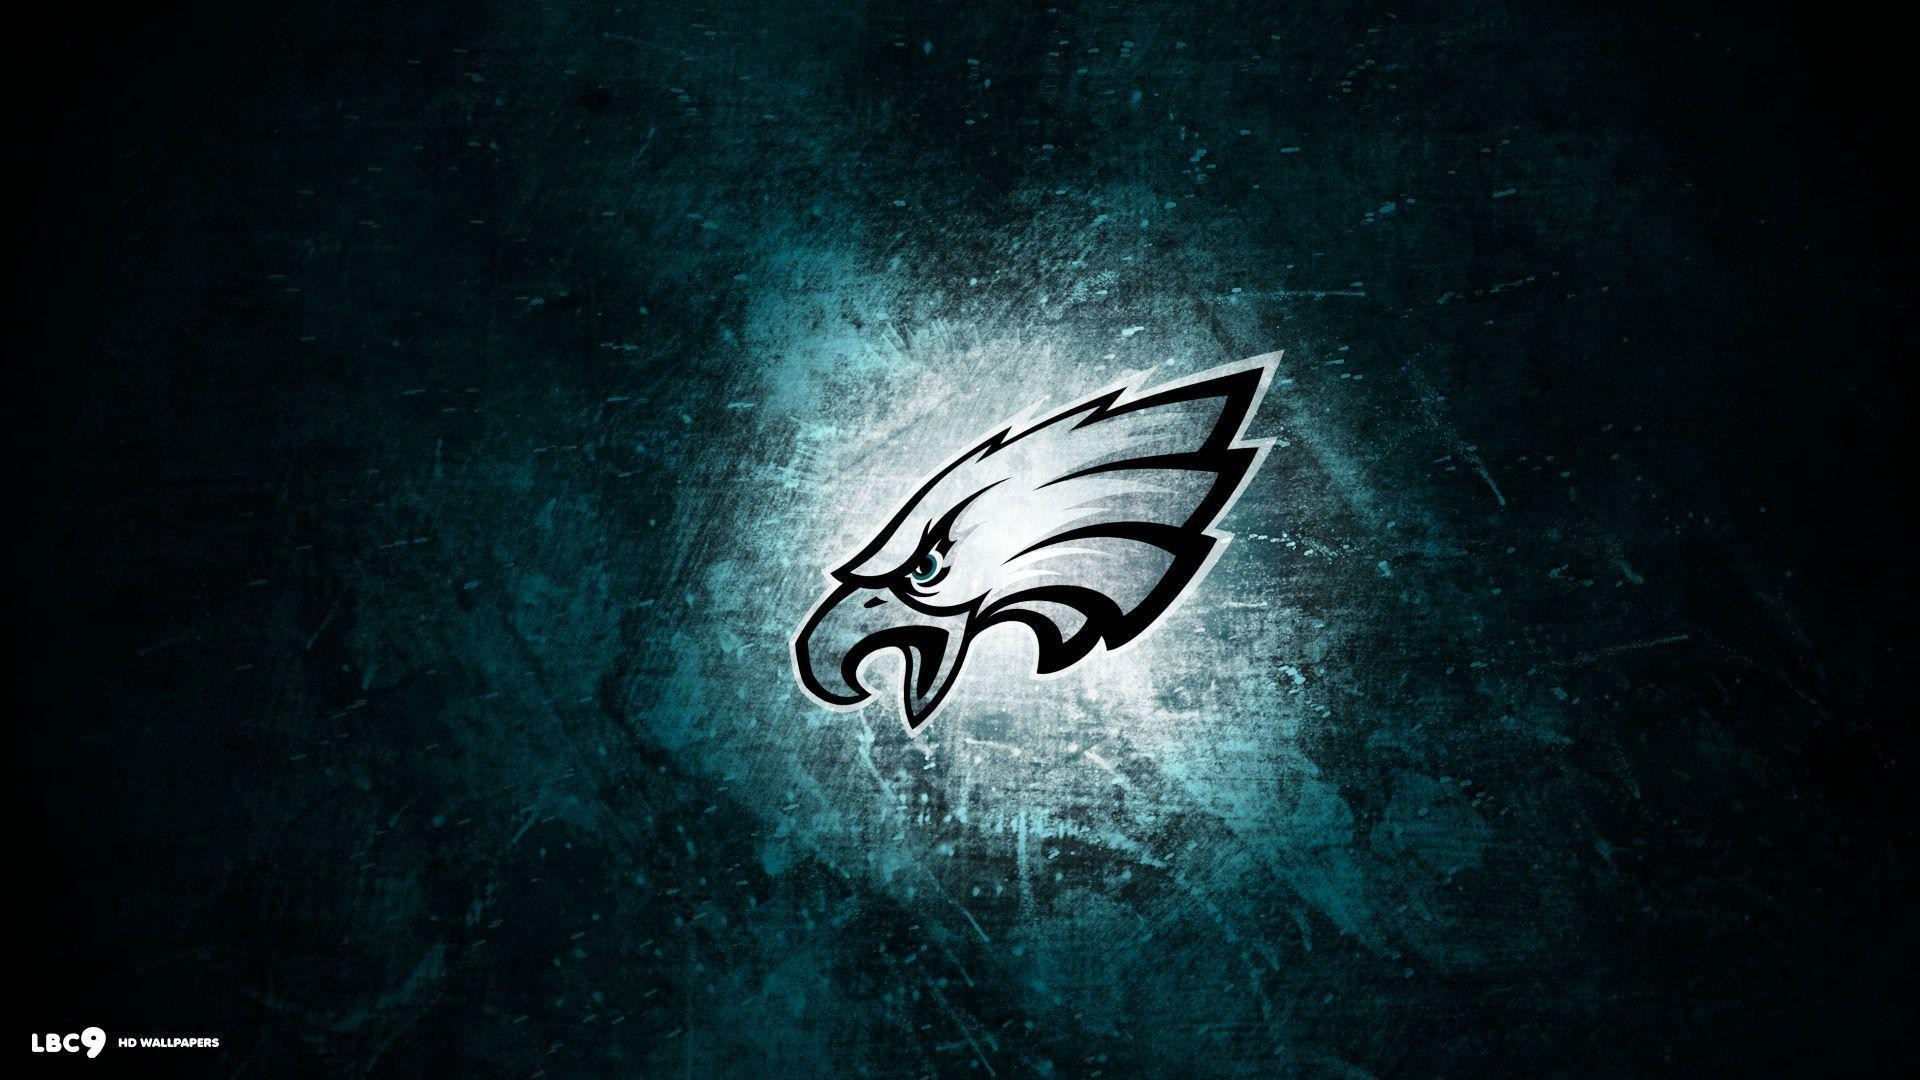 HD Eagles Backgrounds with resolution 1920x1080 pixel. You can make this wallpaper for your Mac or Windows Desktop Background, iPhone, Android or Tablet and another Smartphone device